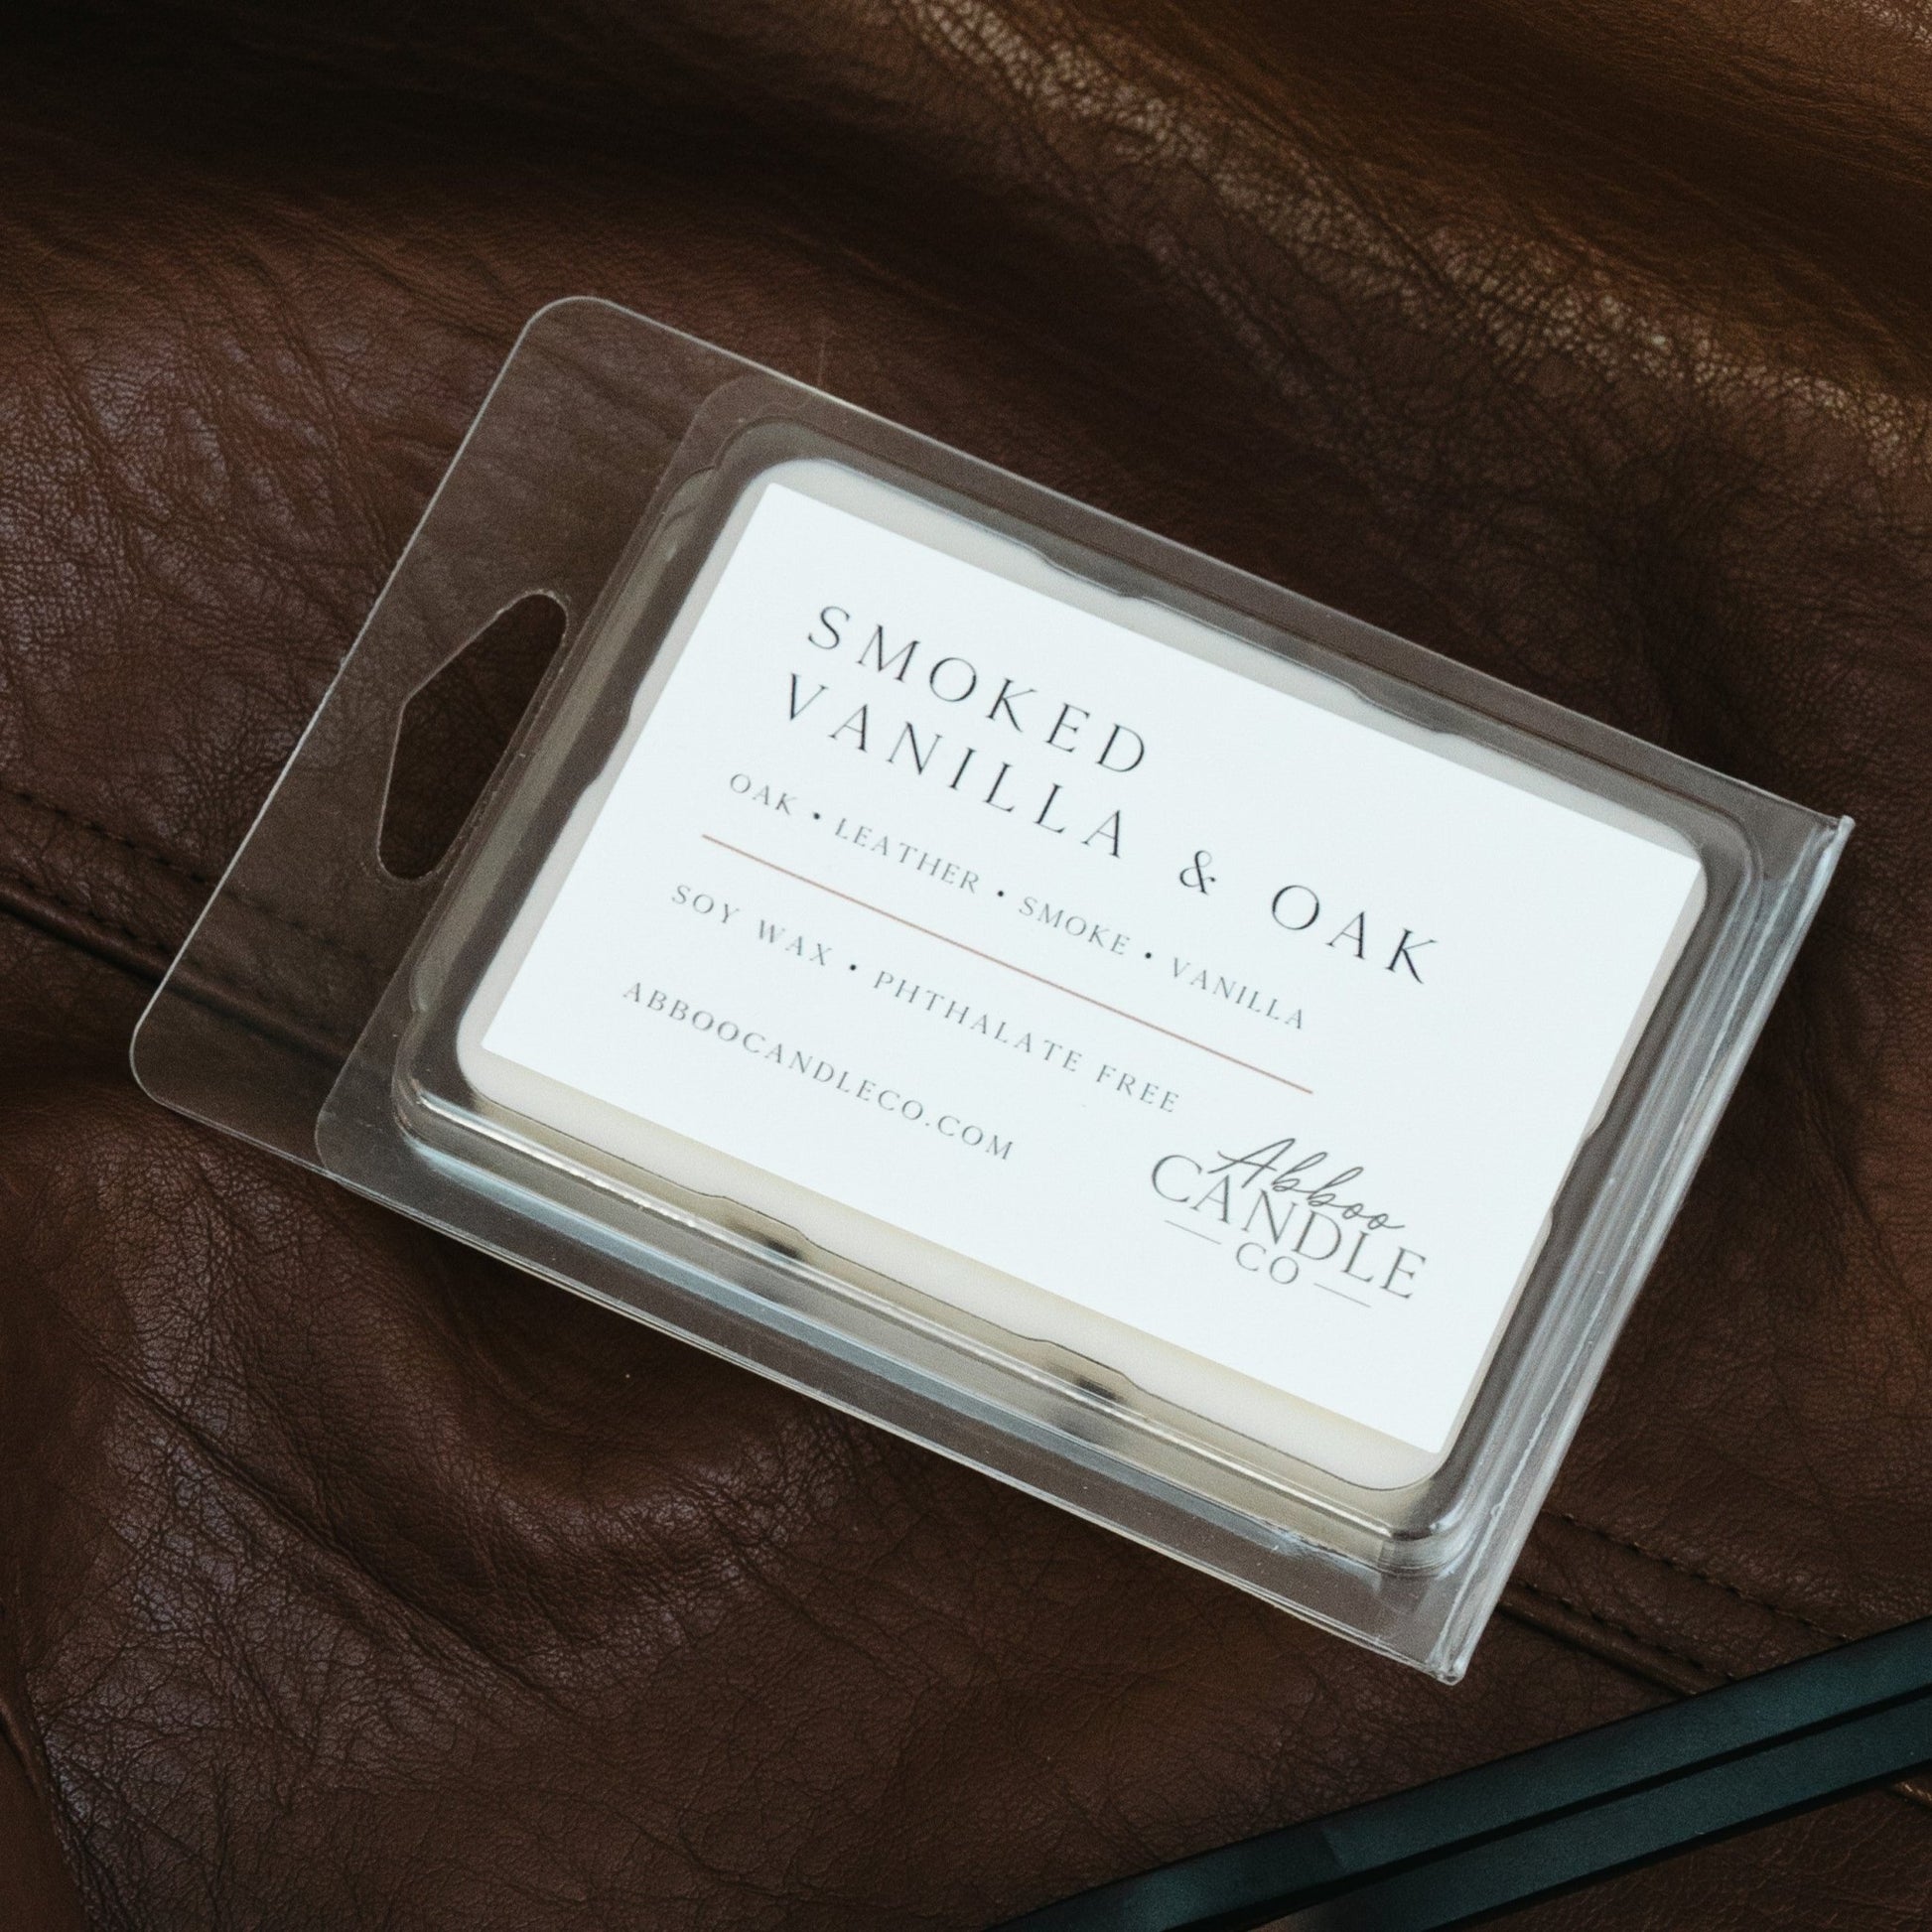 Smoked Vanilla and Oak Soy Wax Melts - Abboo Candle Co